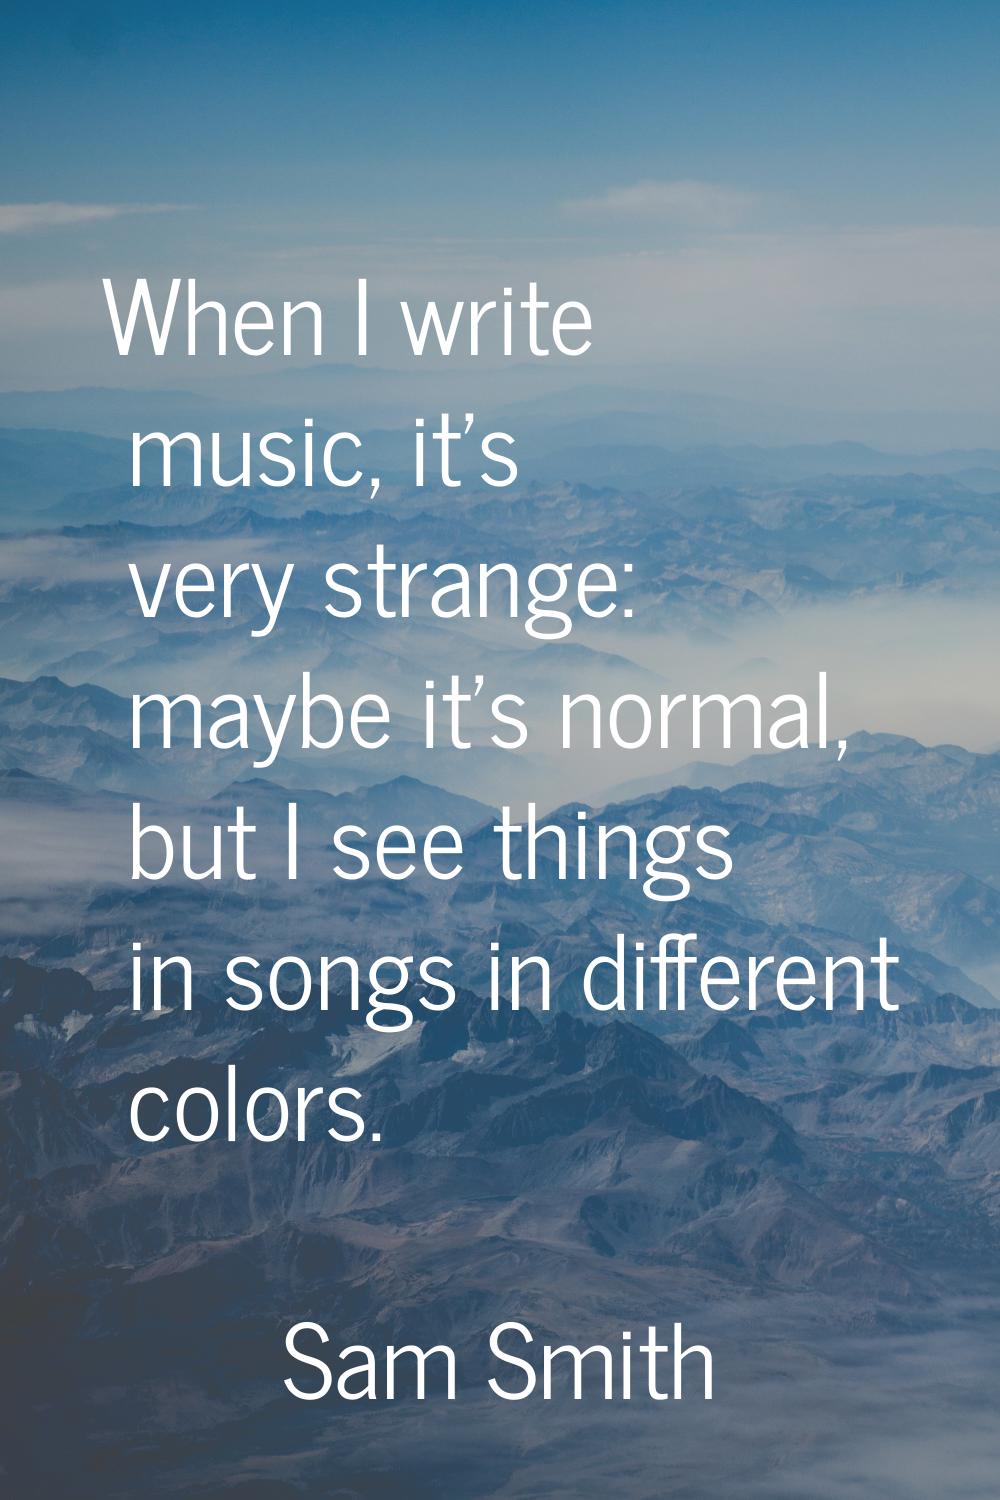 When I write music, it's very strange: maybe it's normal, but I see things in songs in different co